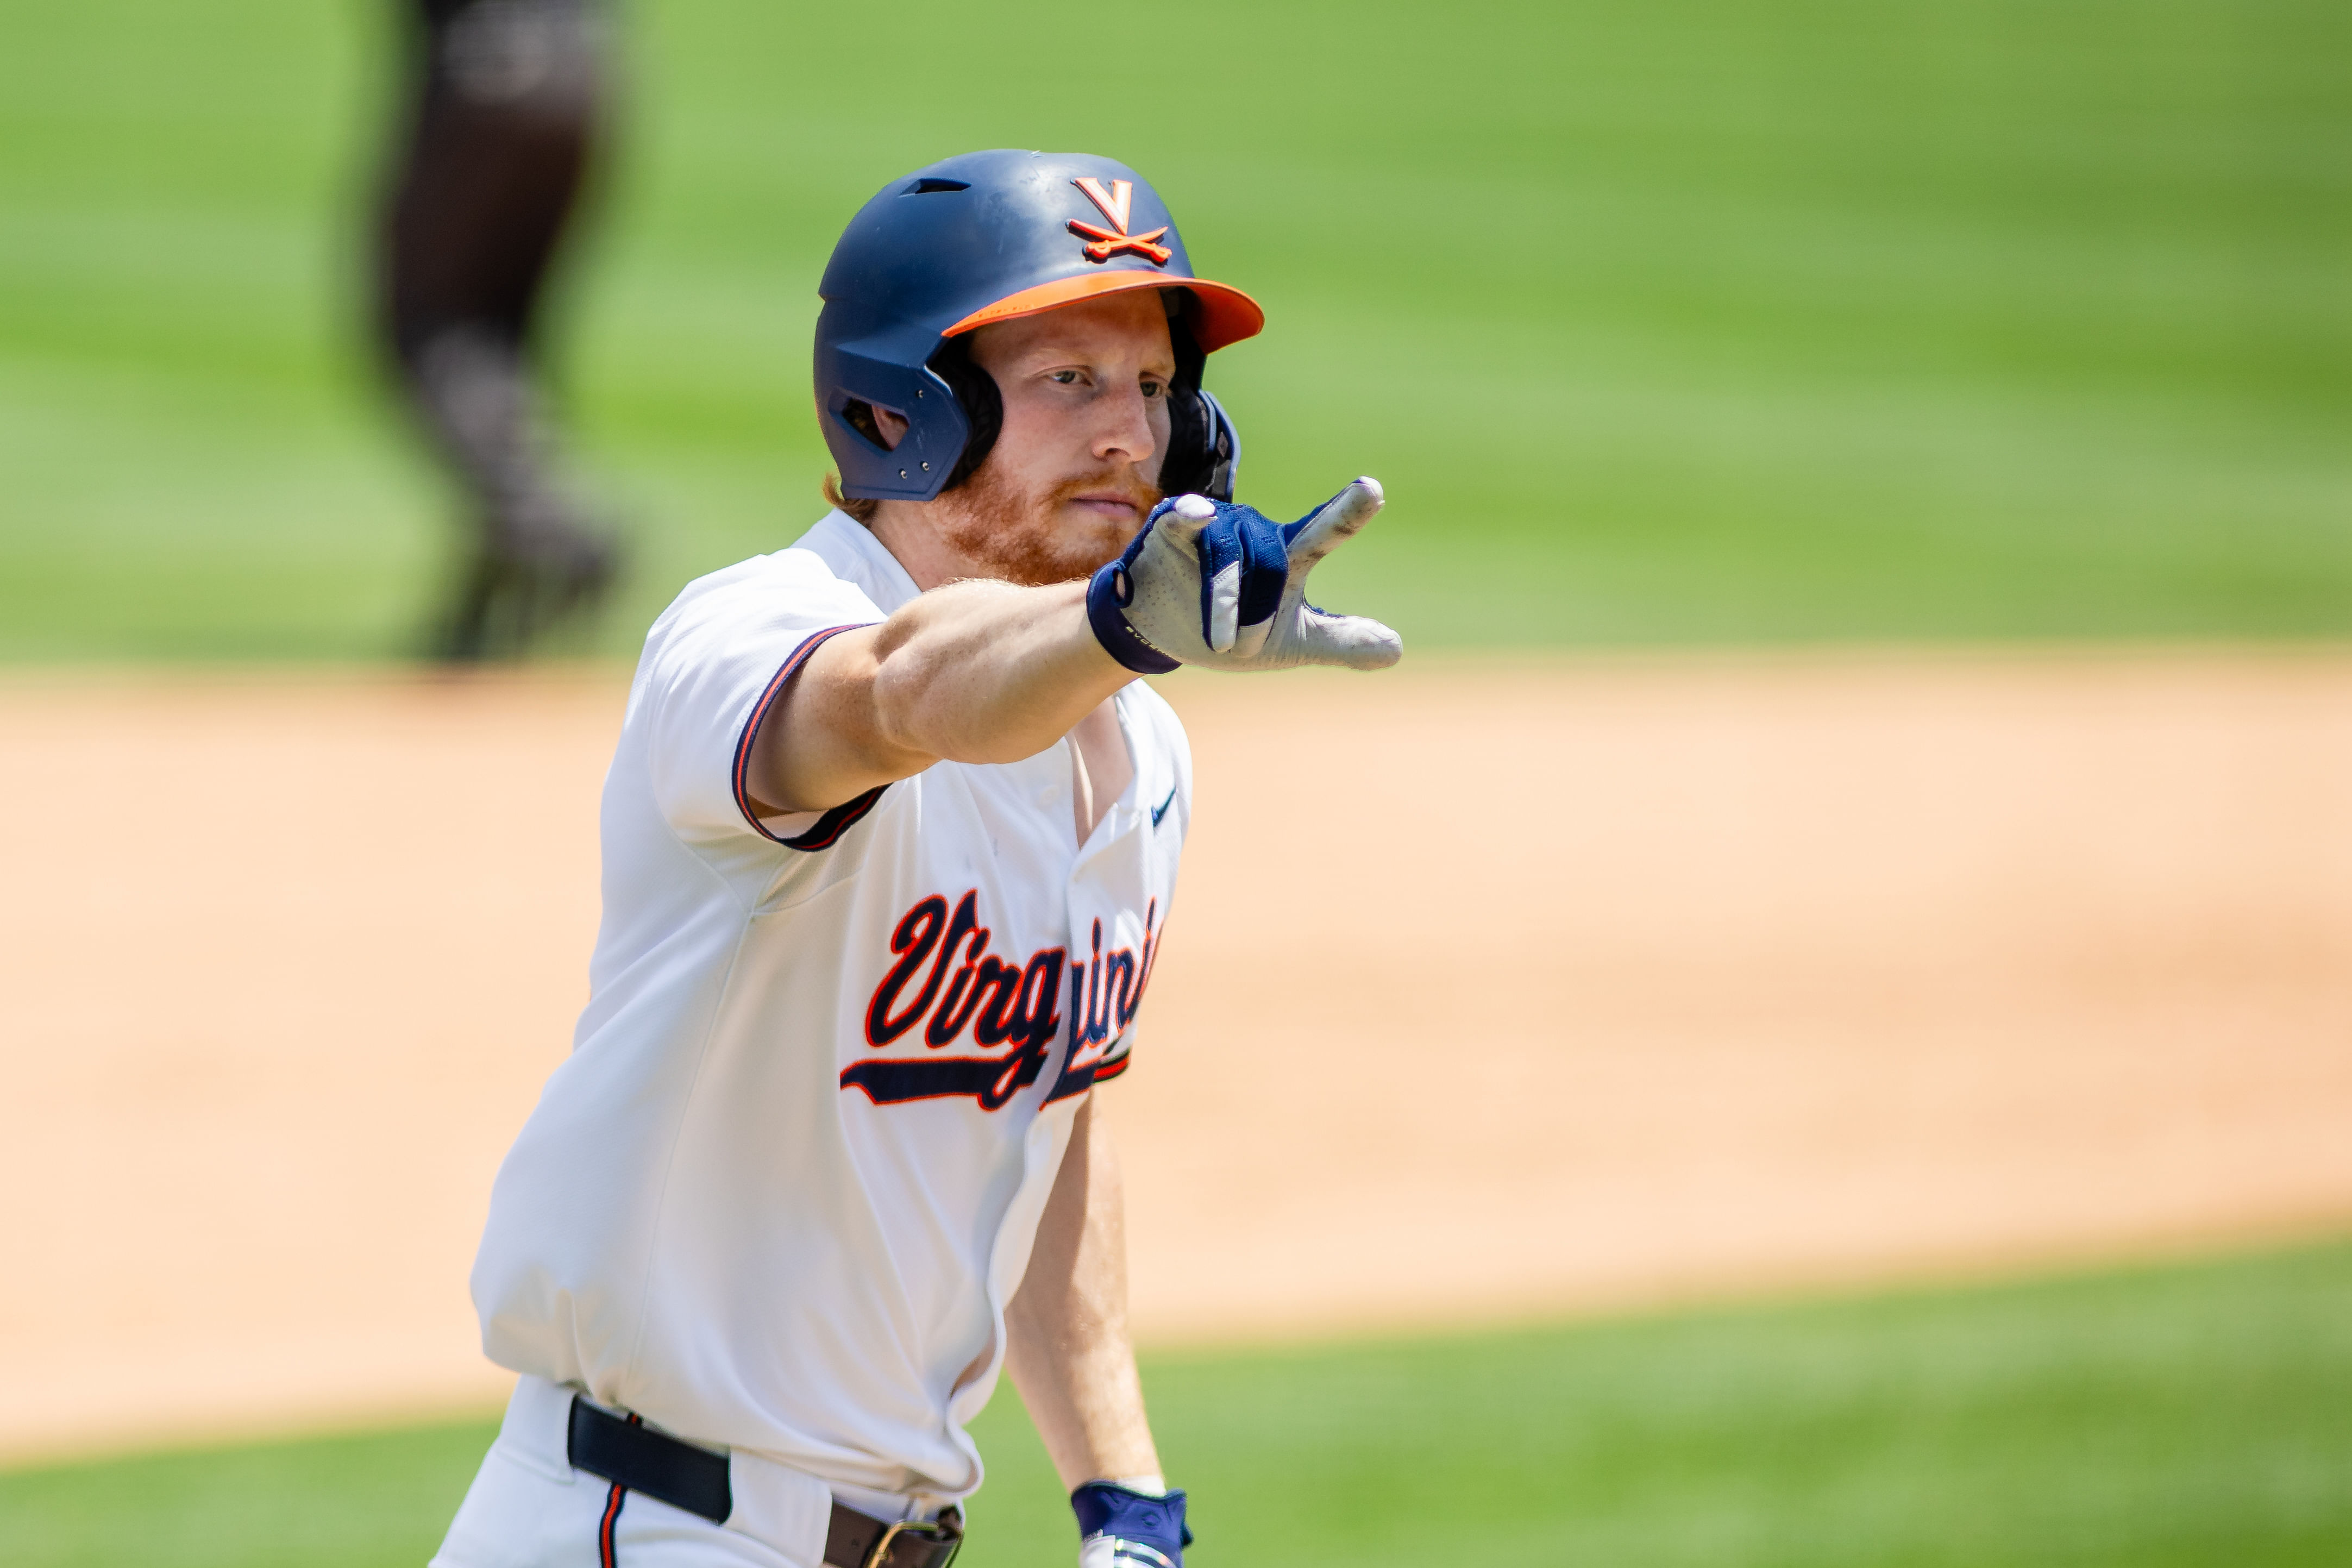 The Virginia Cavaliers have advanced to the College World Series